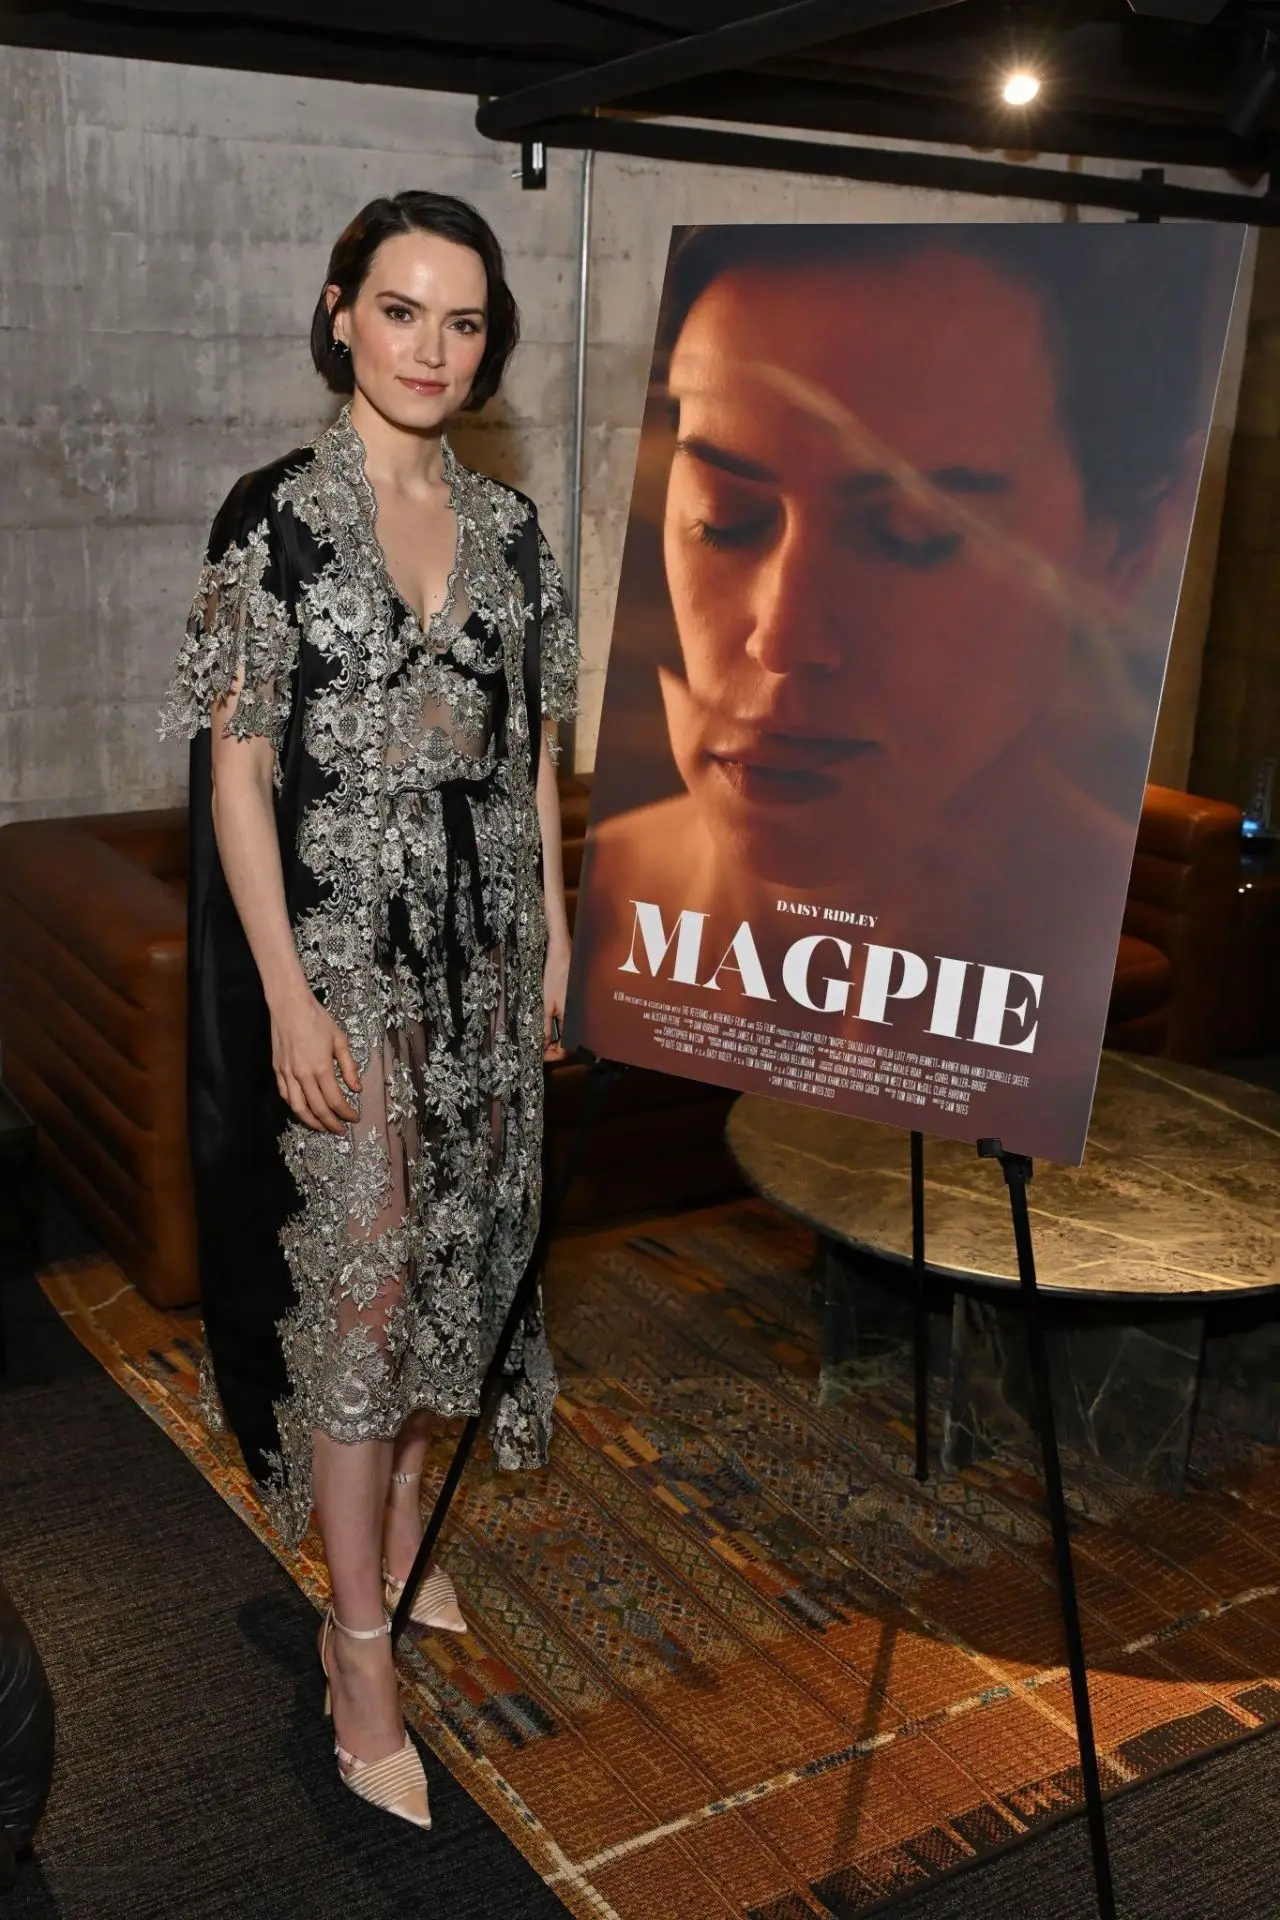 DAISY RIDLEY AT MAGPIE PREMIERE AT THE SXSW FESTIVAL IN AUSTIN